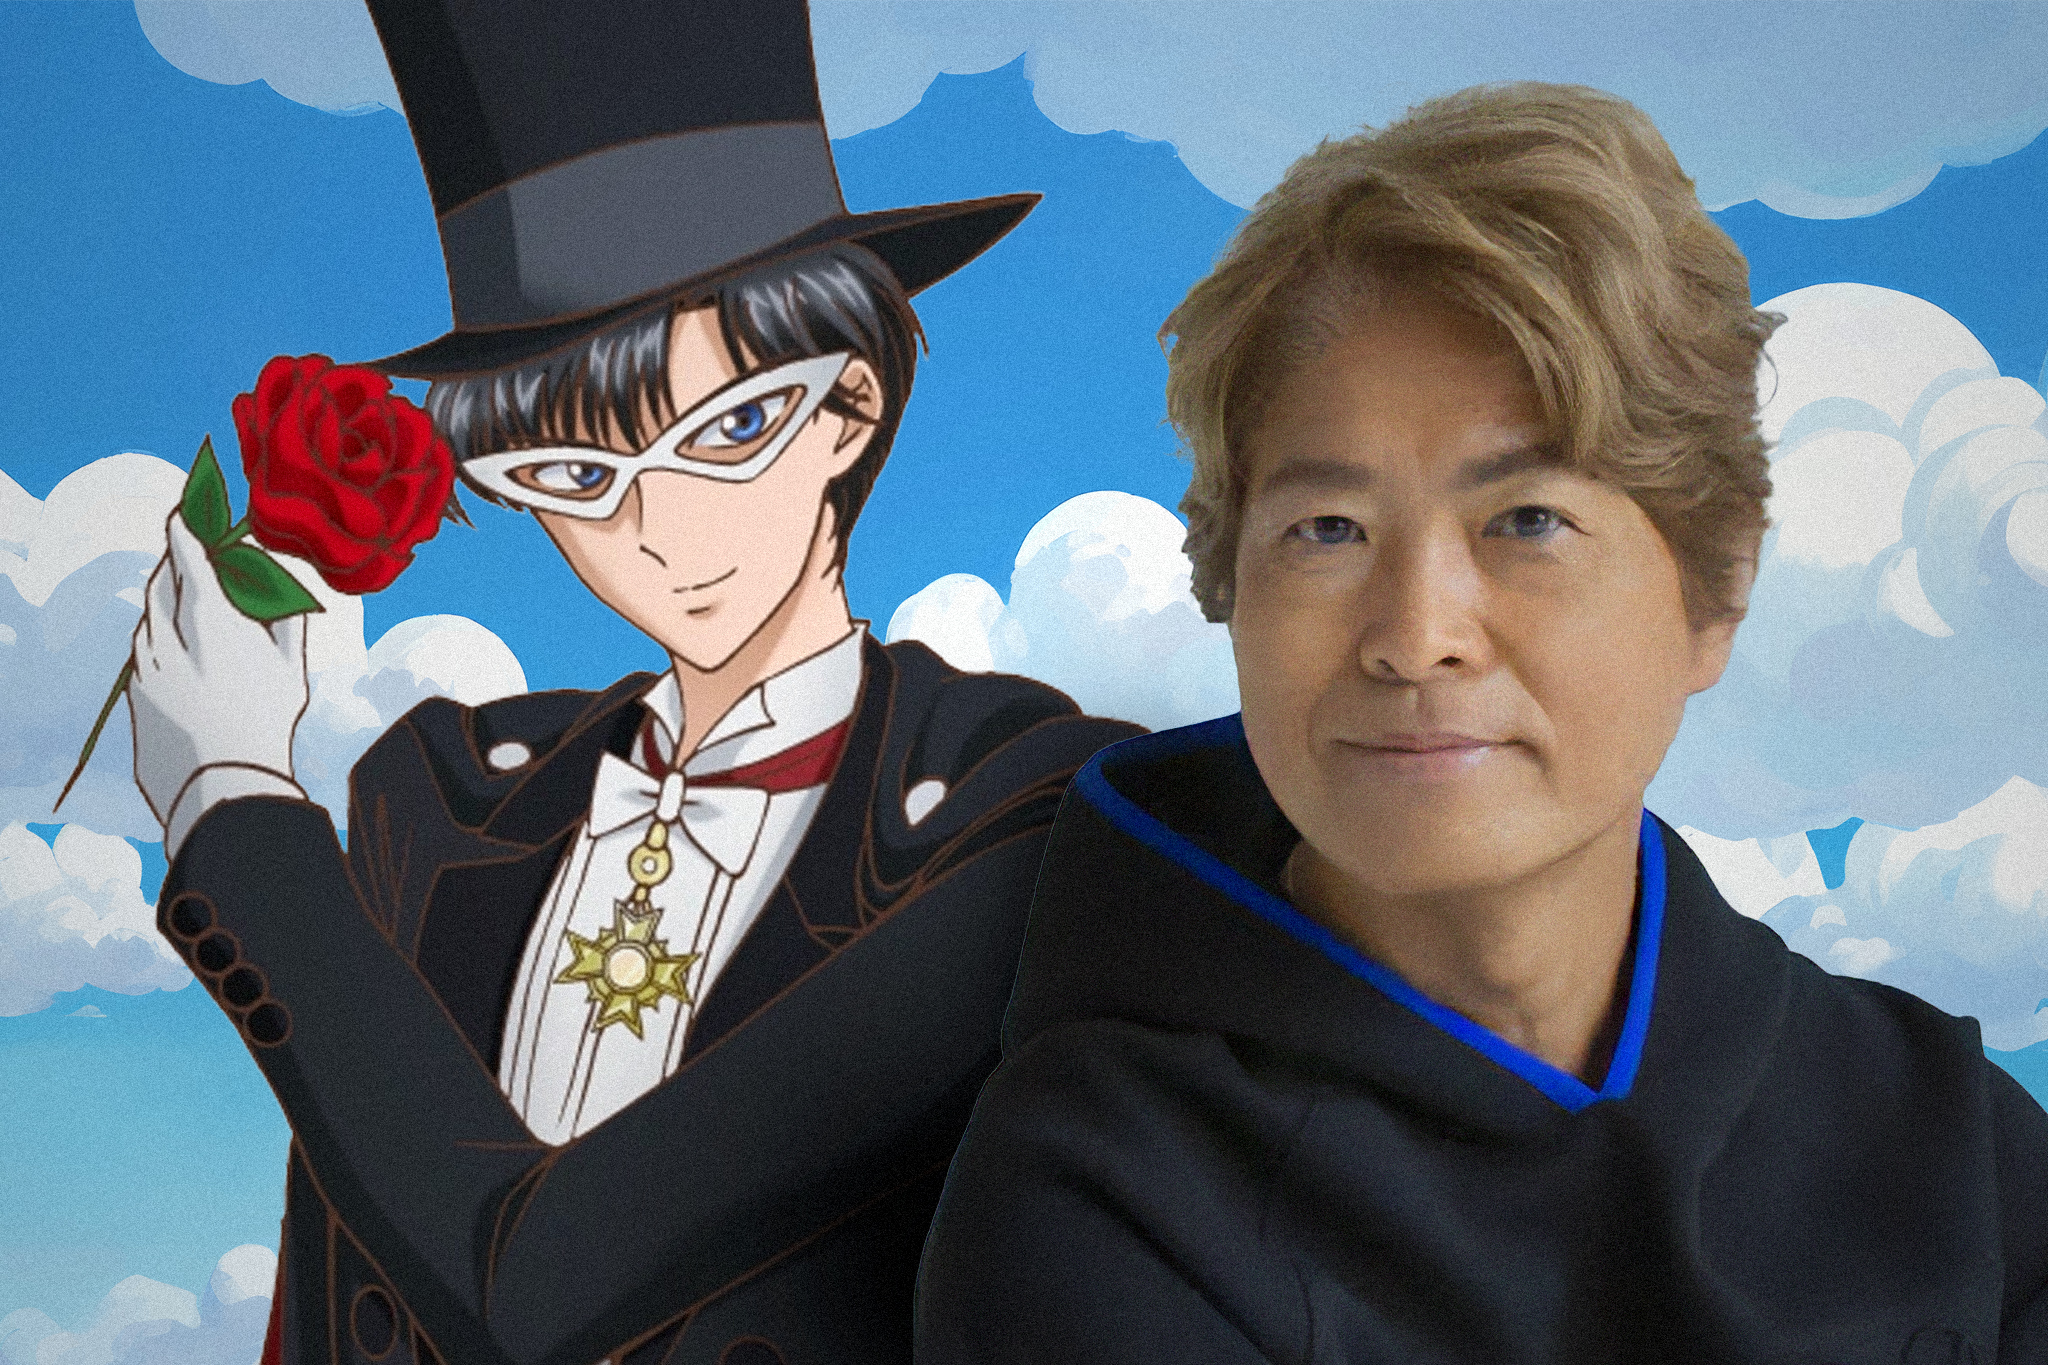 Famous voice actor Toru Furuya admits to having an affair with a fan